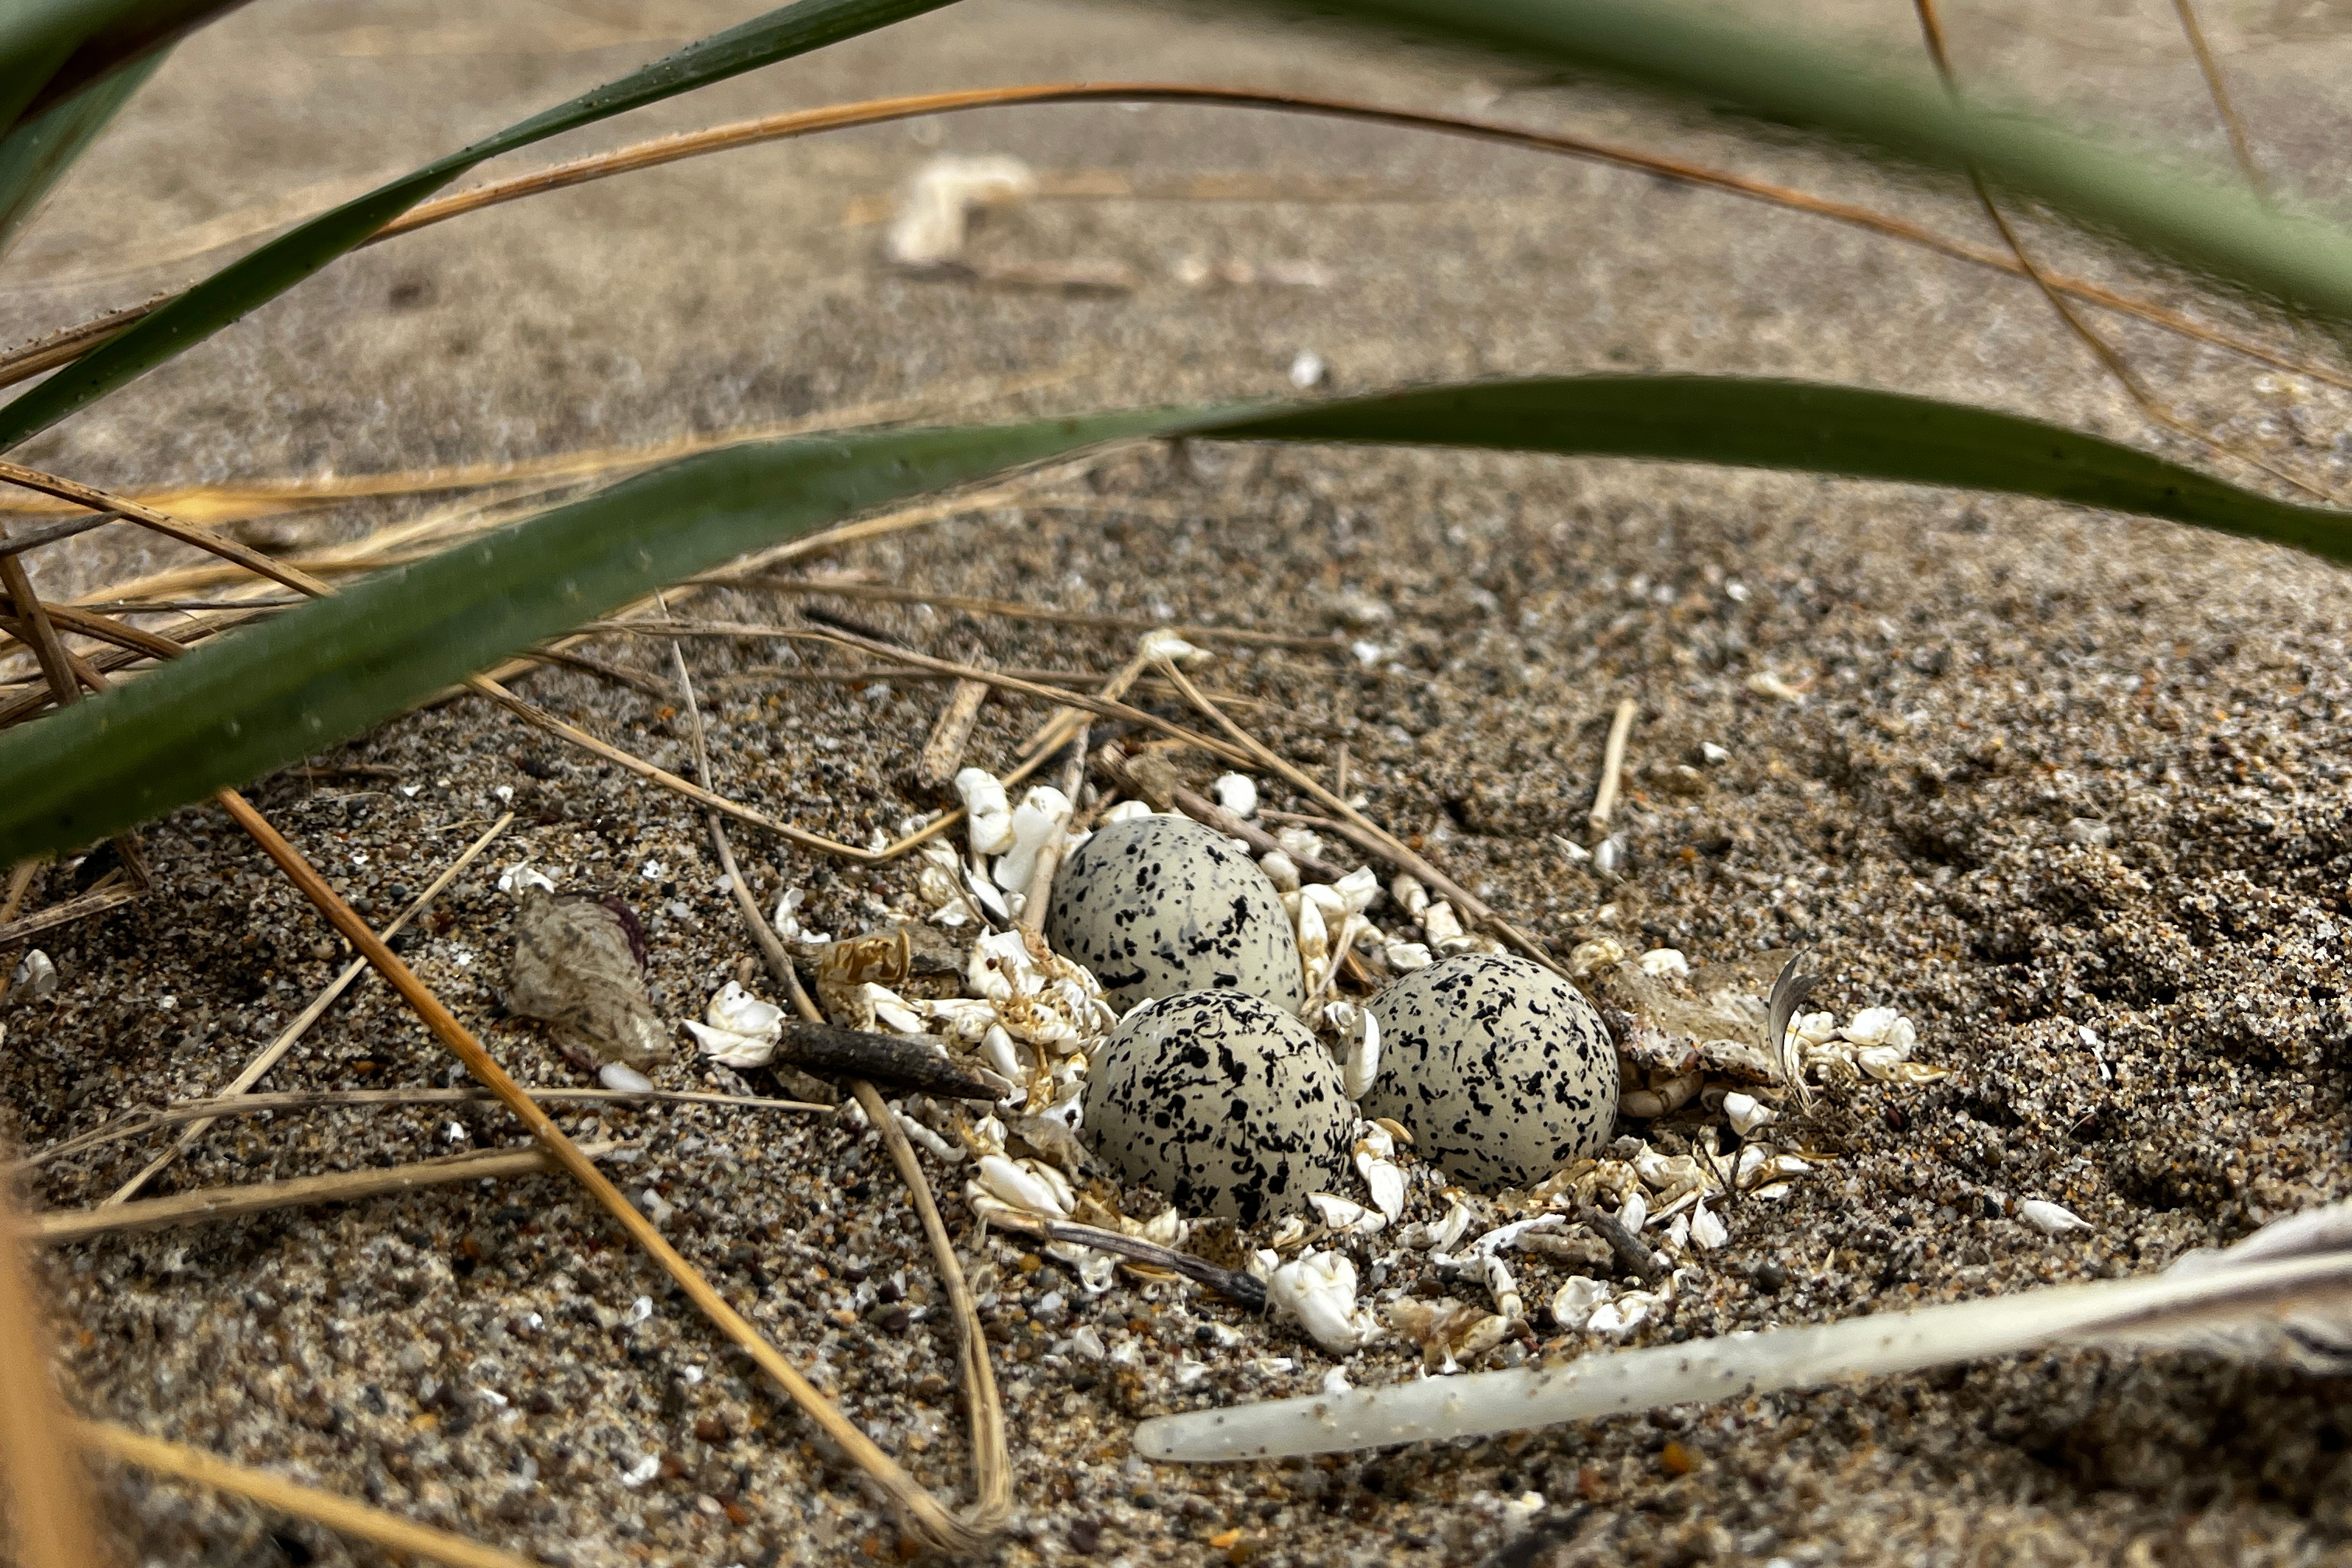 A photo of three small black-speckled, beige-colored eggs lying on sand under a few large blades of grass.